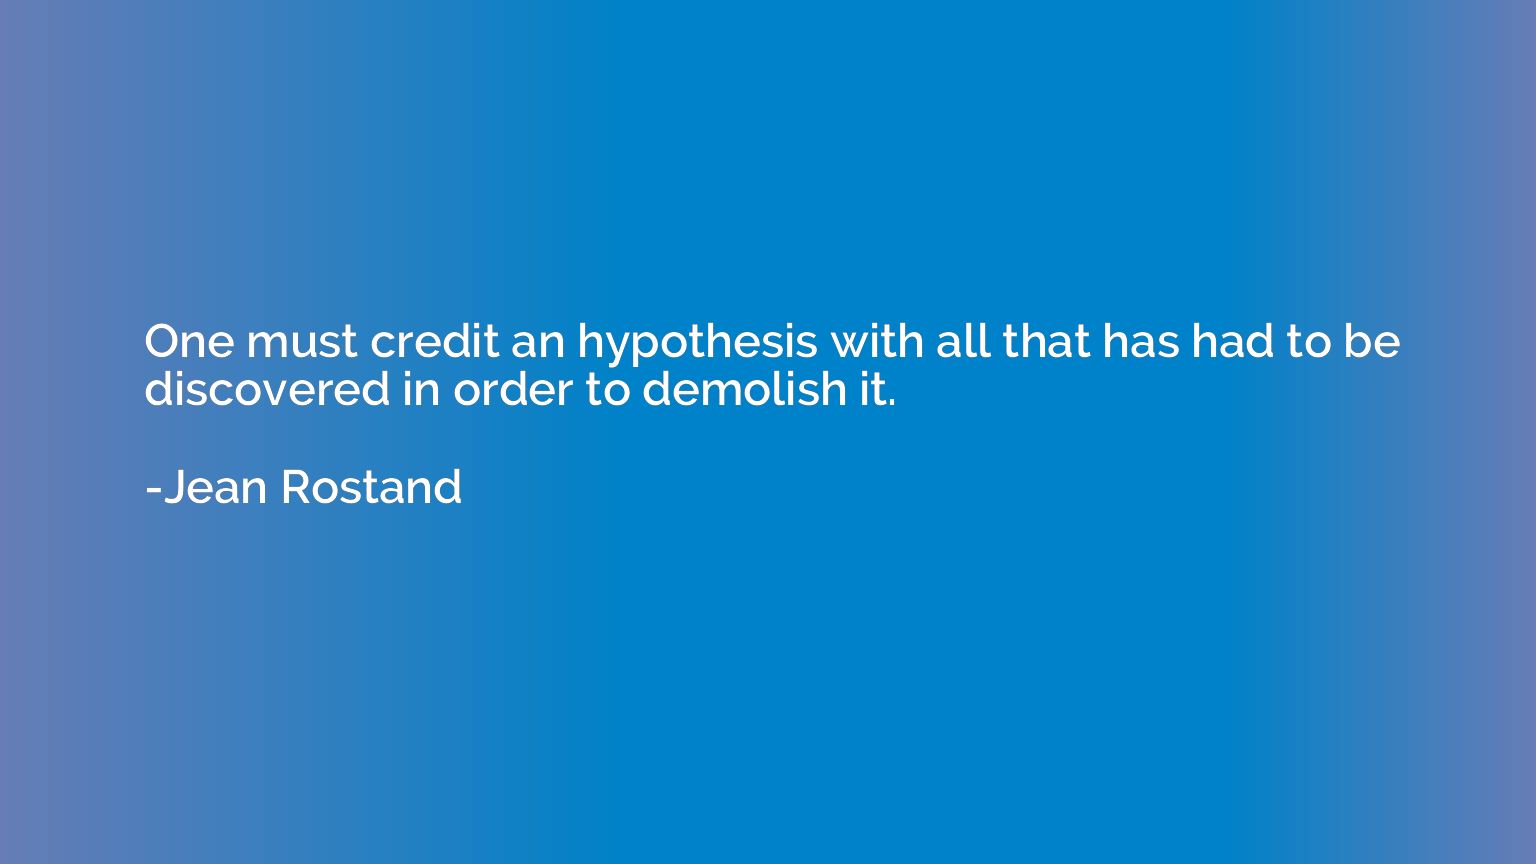 One must credit an hypothesis with all that has had to be di